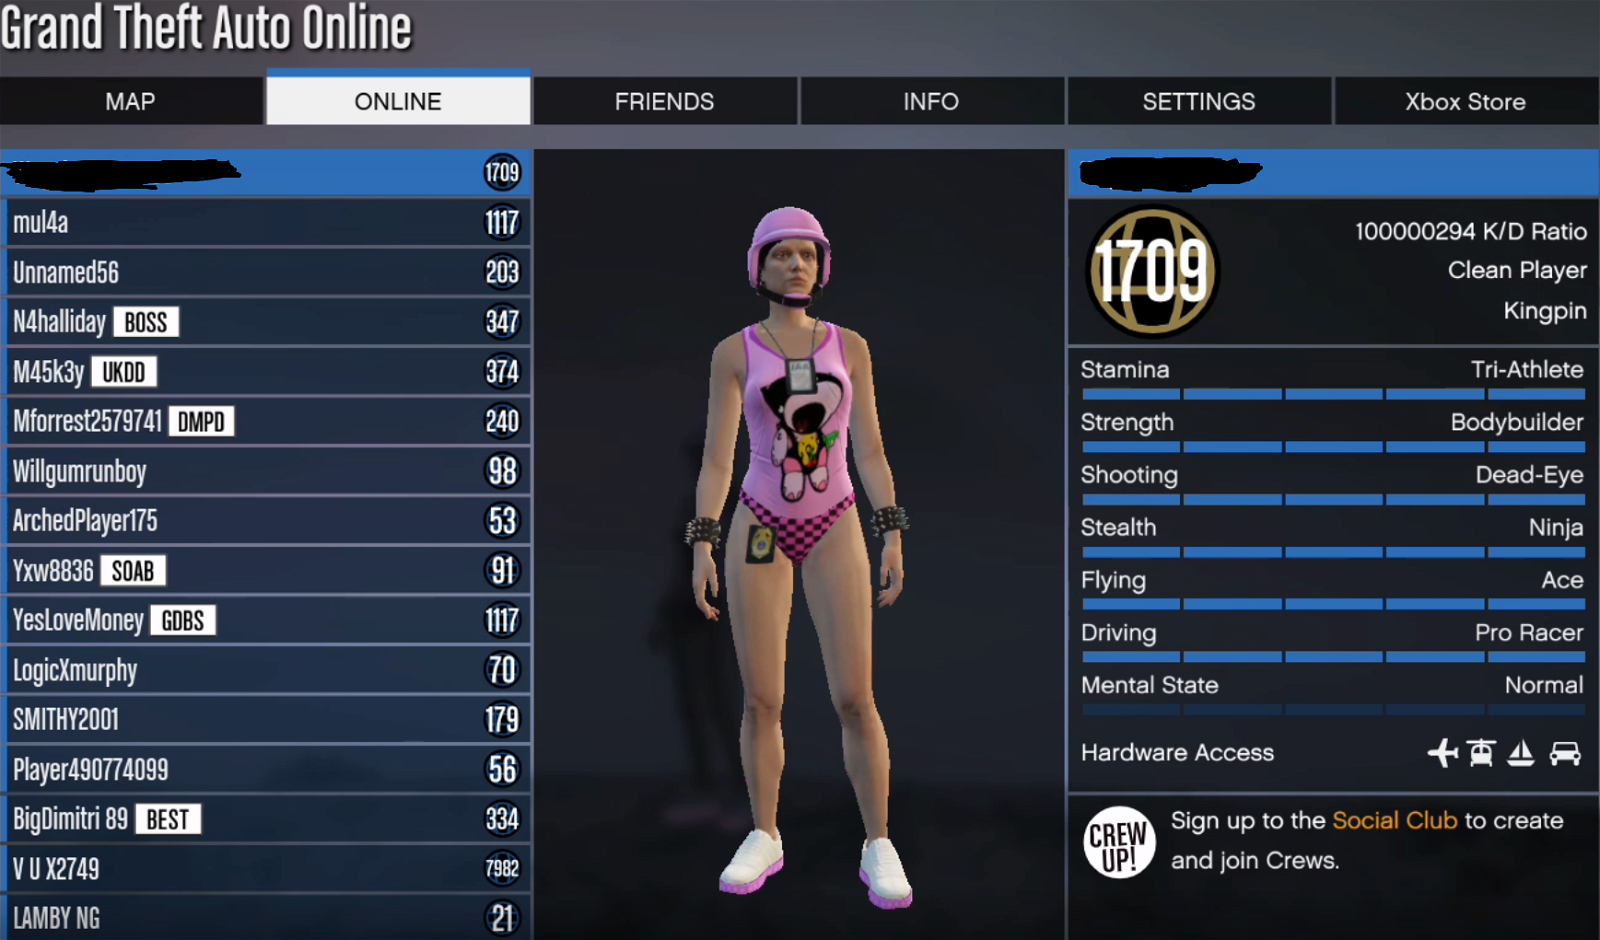 Modded Accounts for Xbox One & Series X/S, GTA 5 Online